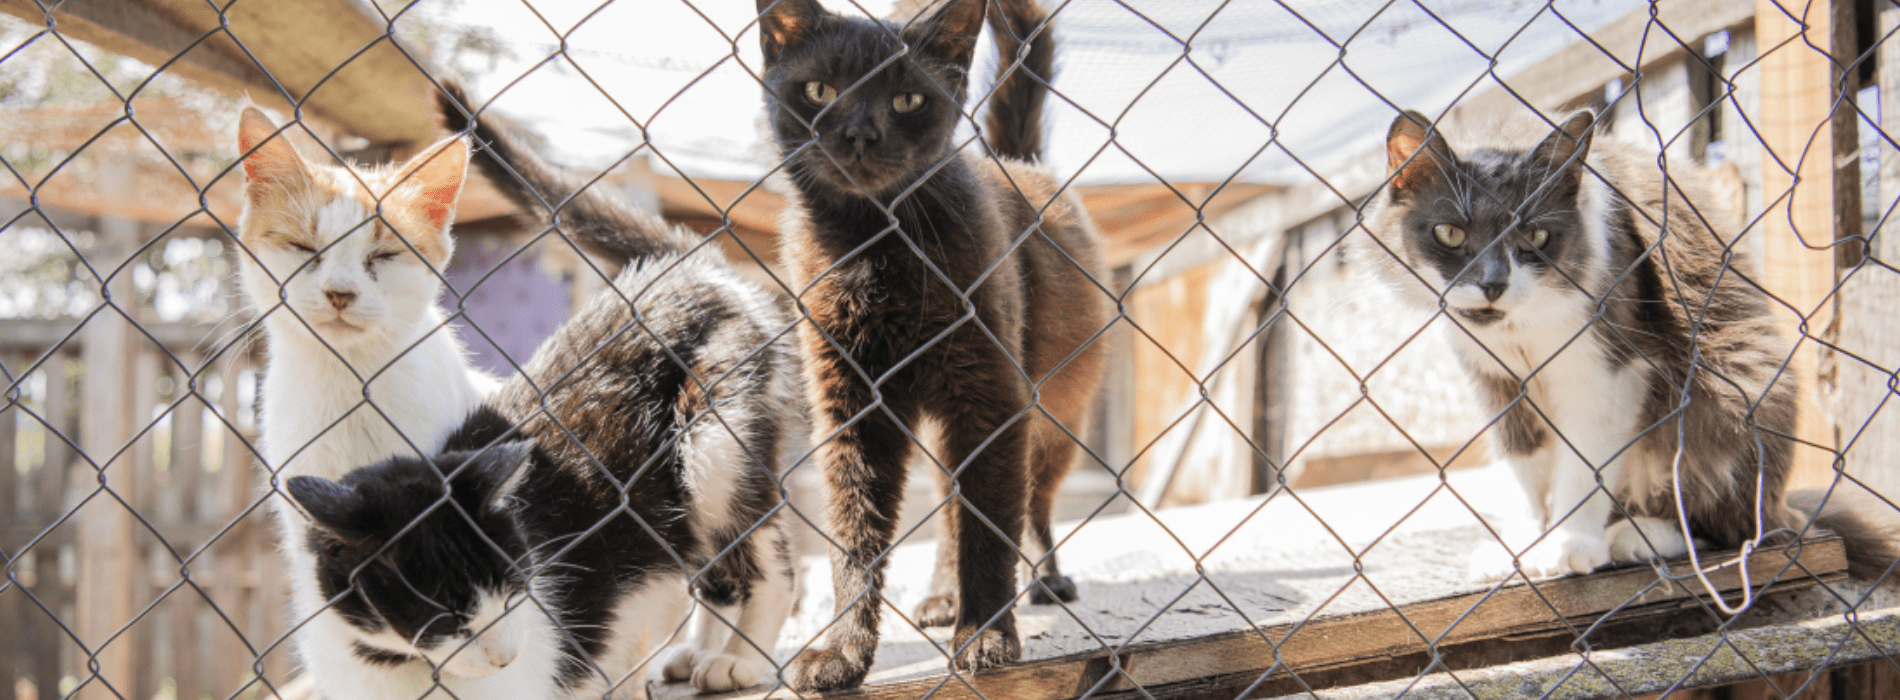 cats in ukrainian shelter peering out